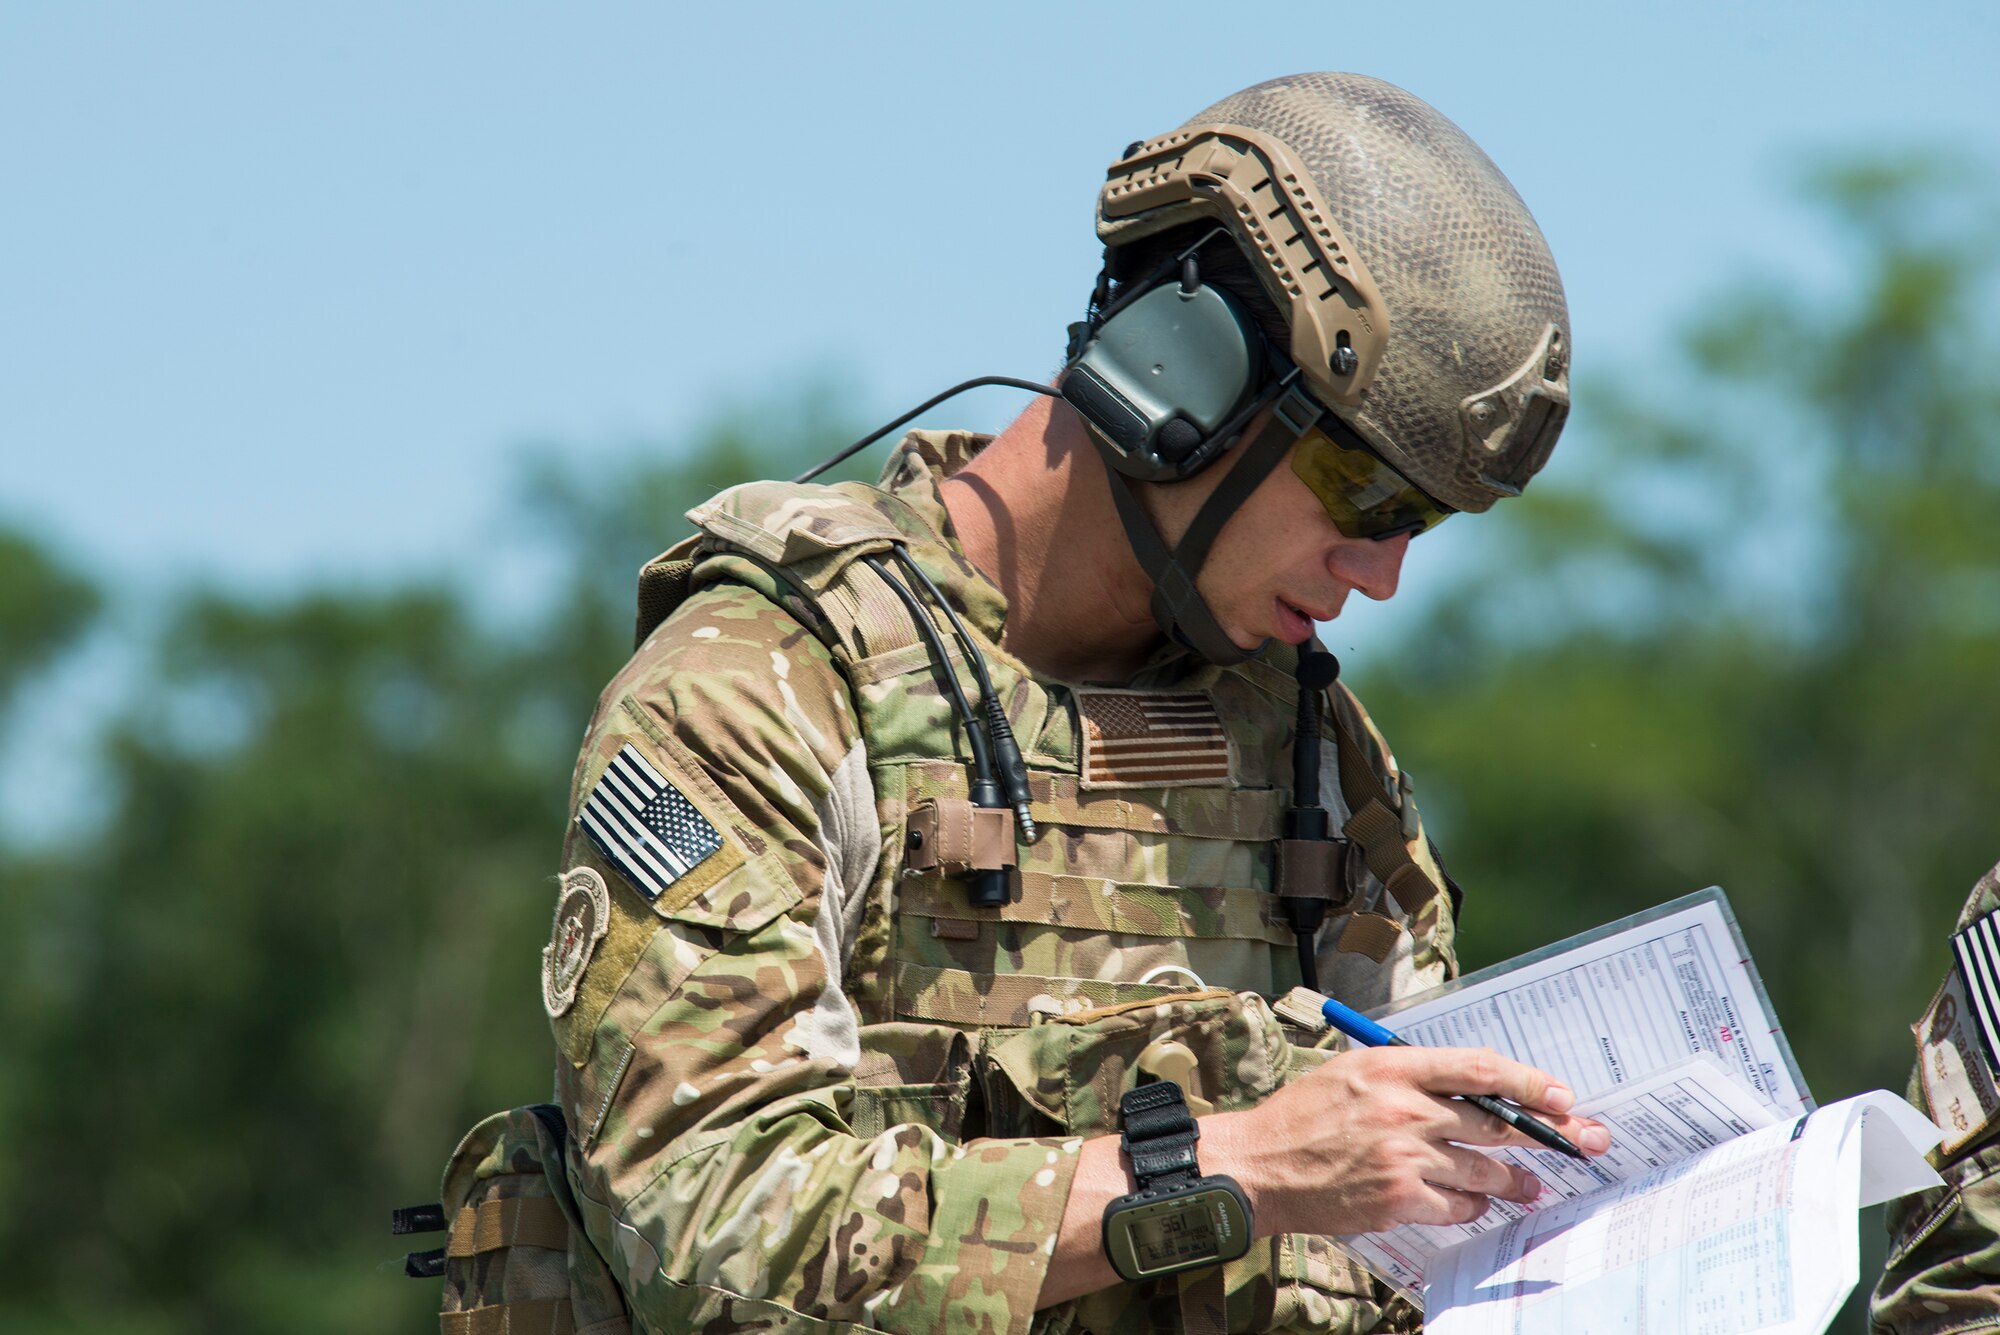 U.S. Air Force Tech. Sgt. Ron Tyson, 7th Air Support Operations Squadron tactical air control party, confirms coordinates during a joint training with the 74th Fighter Squadron June 18, 2015, on Grand Bay Bombing and Gunnery Range at Moody Air Force Base, Ga. TACPs from the 7th ASOS attended briefs, debriefs, academics lessons and controls training both with  simulated and real life munitions. (U.S. Air Force photo by Airman 1st Class Ceaira Tinsley/Released)